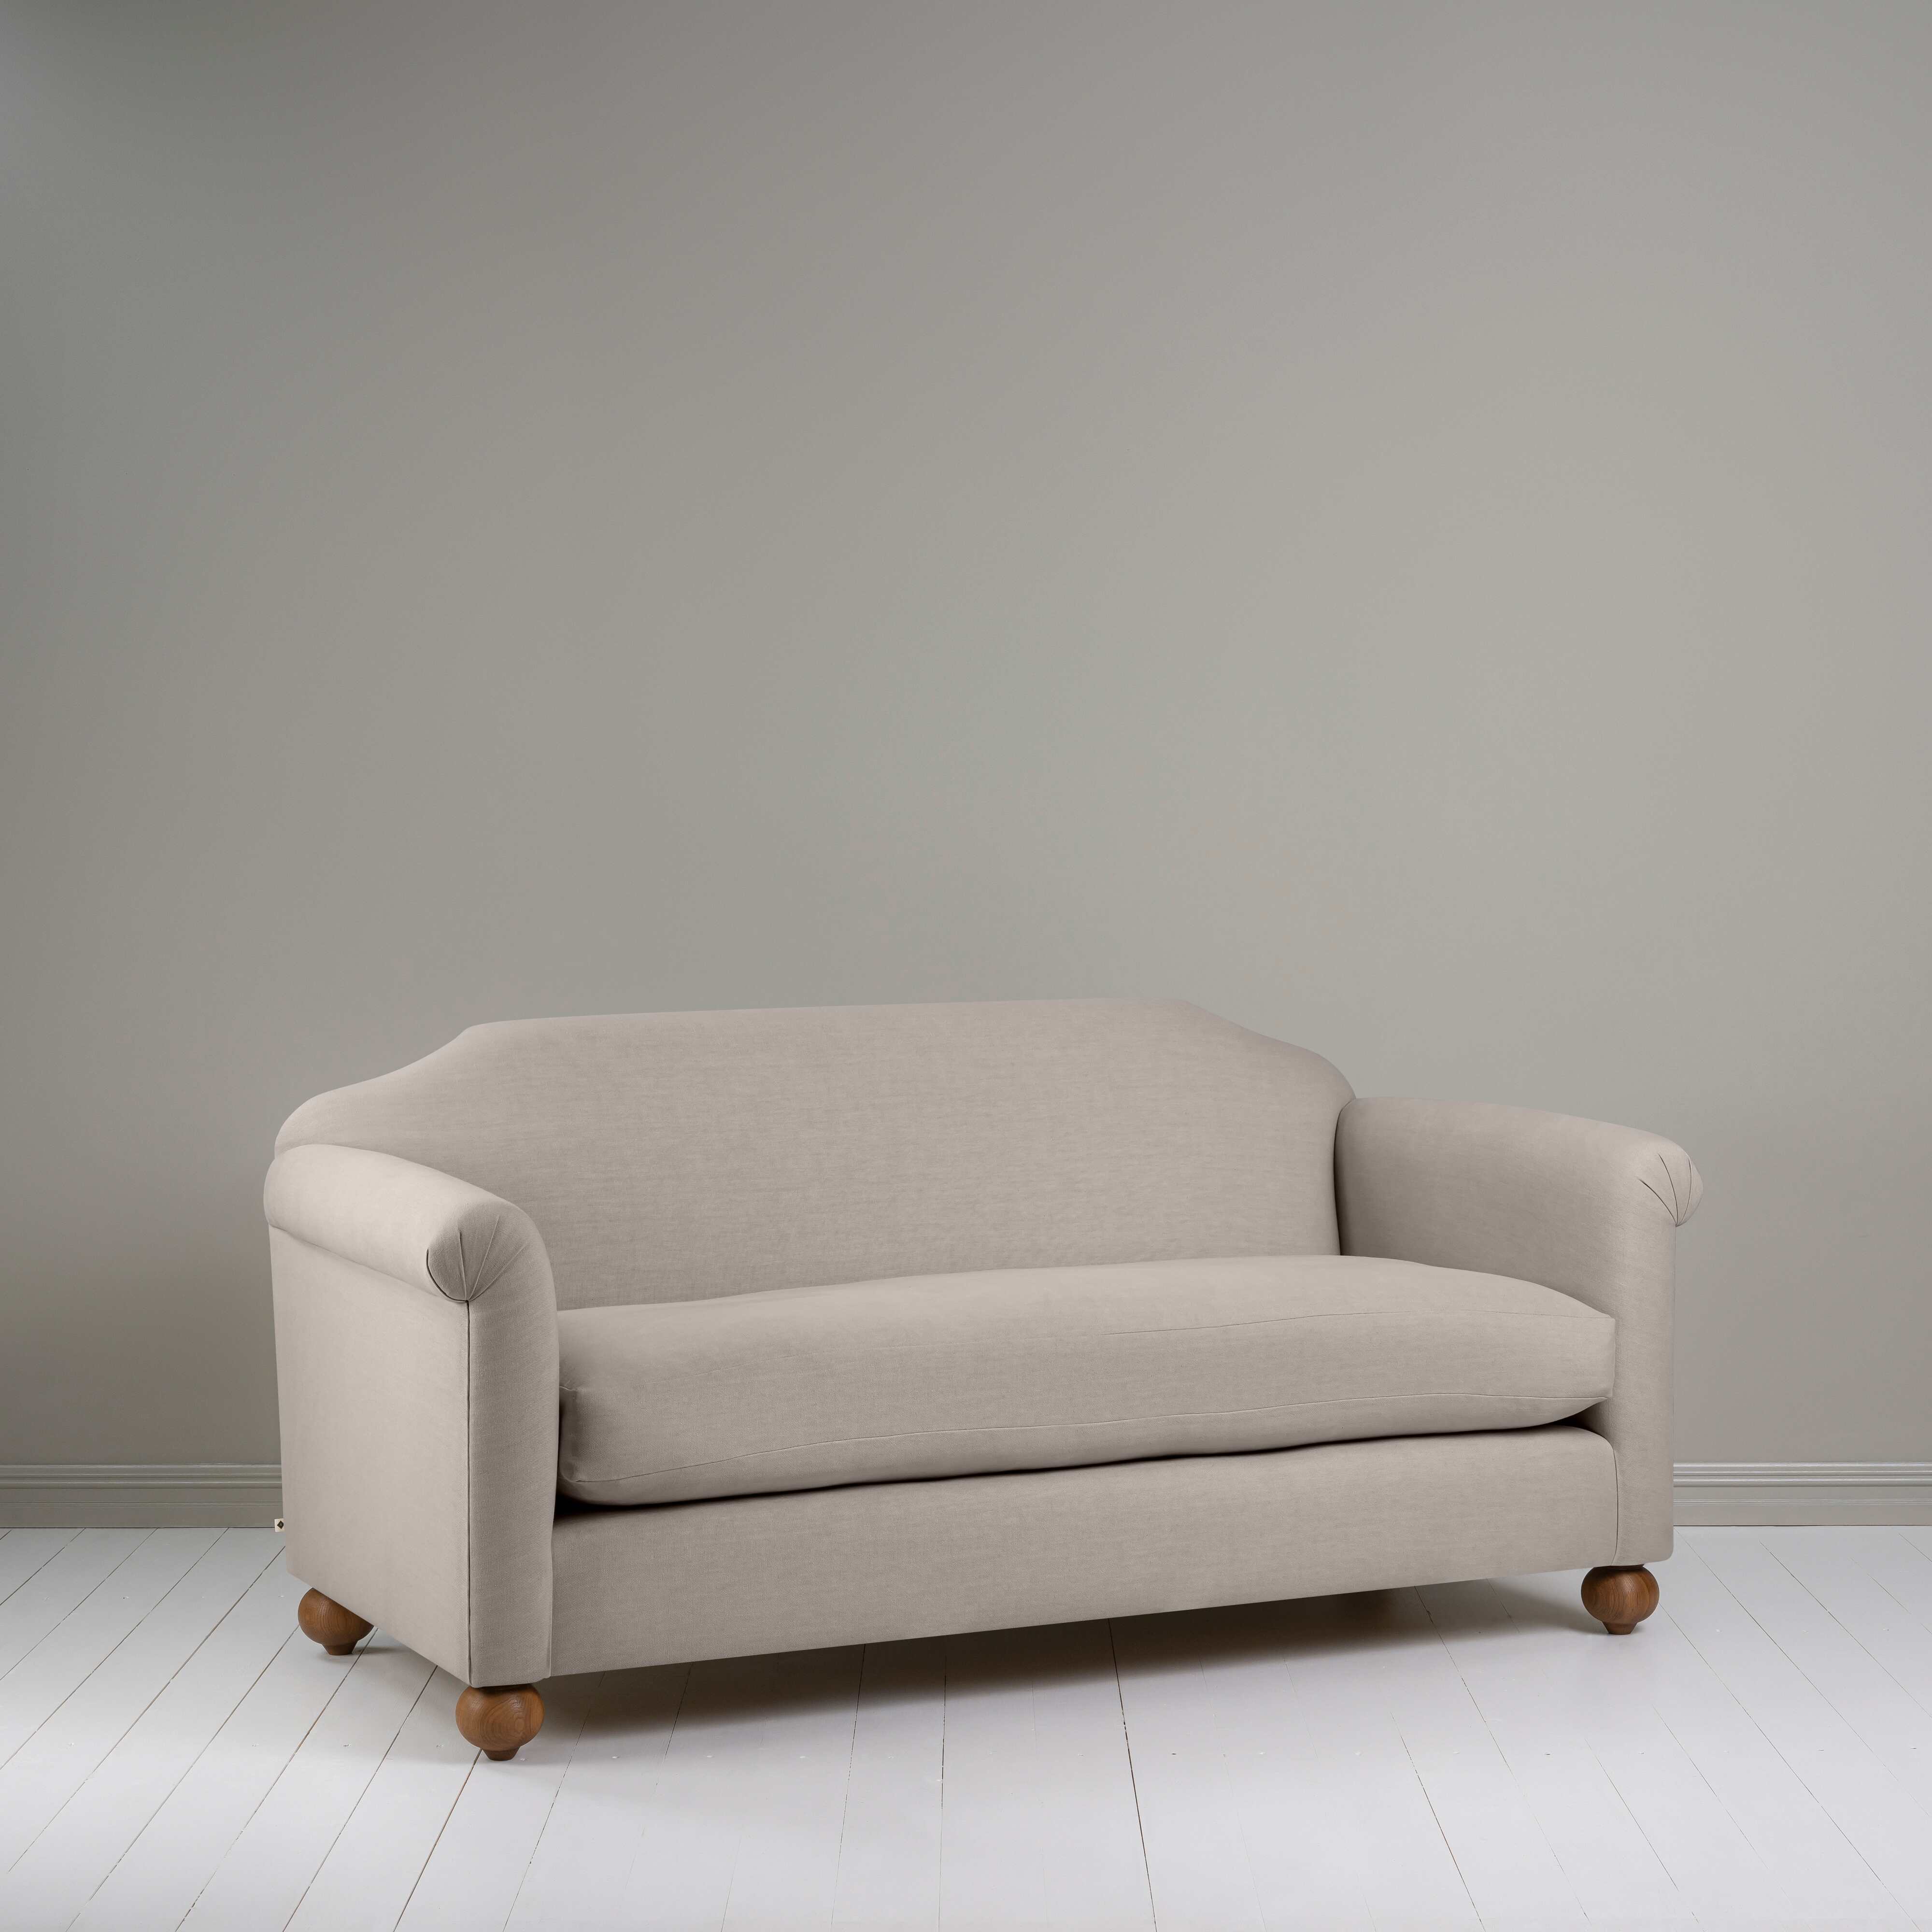  Dolittle 3 Seater Sofa in Laidback Linen Pearl Grey 